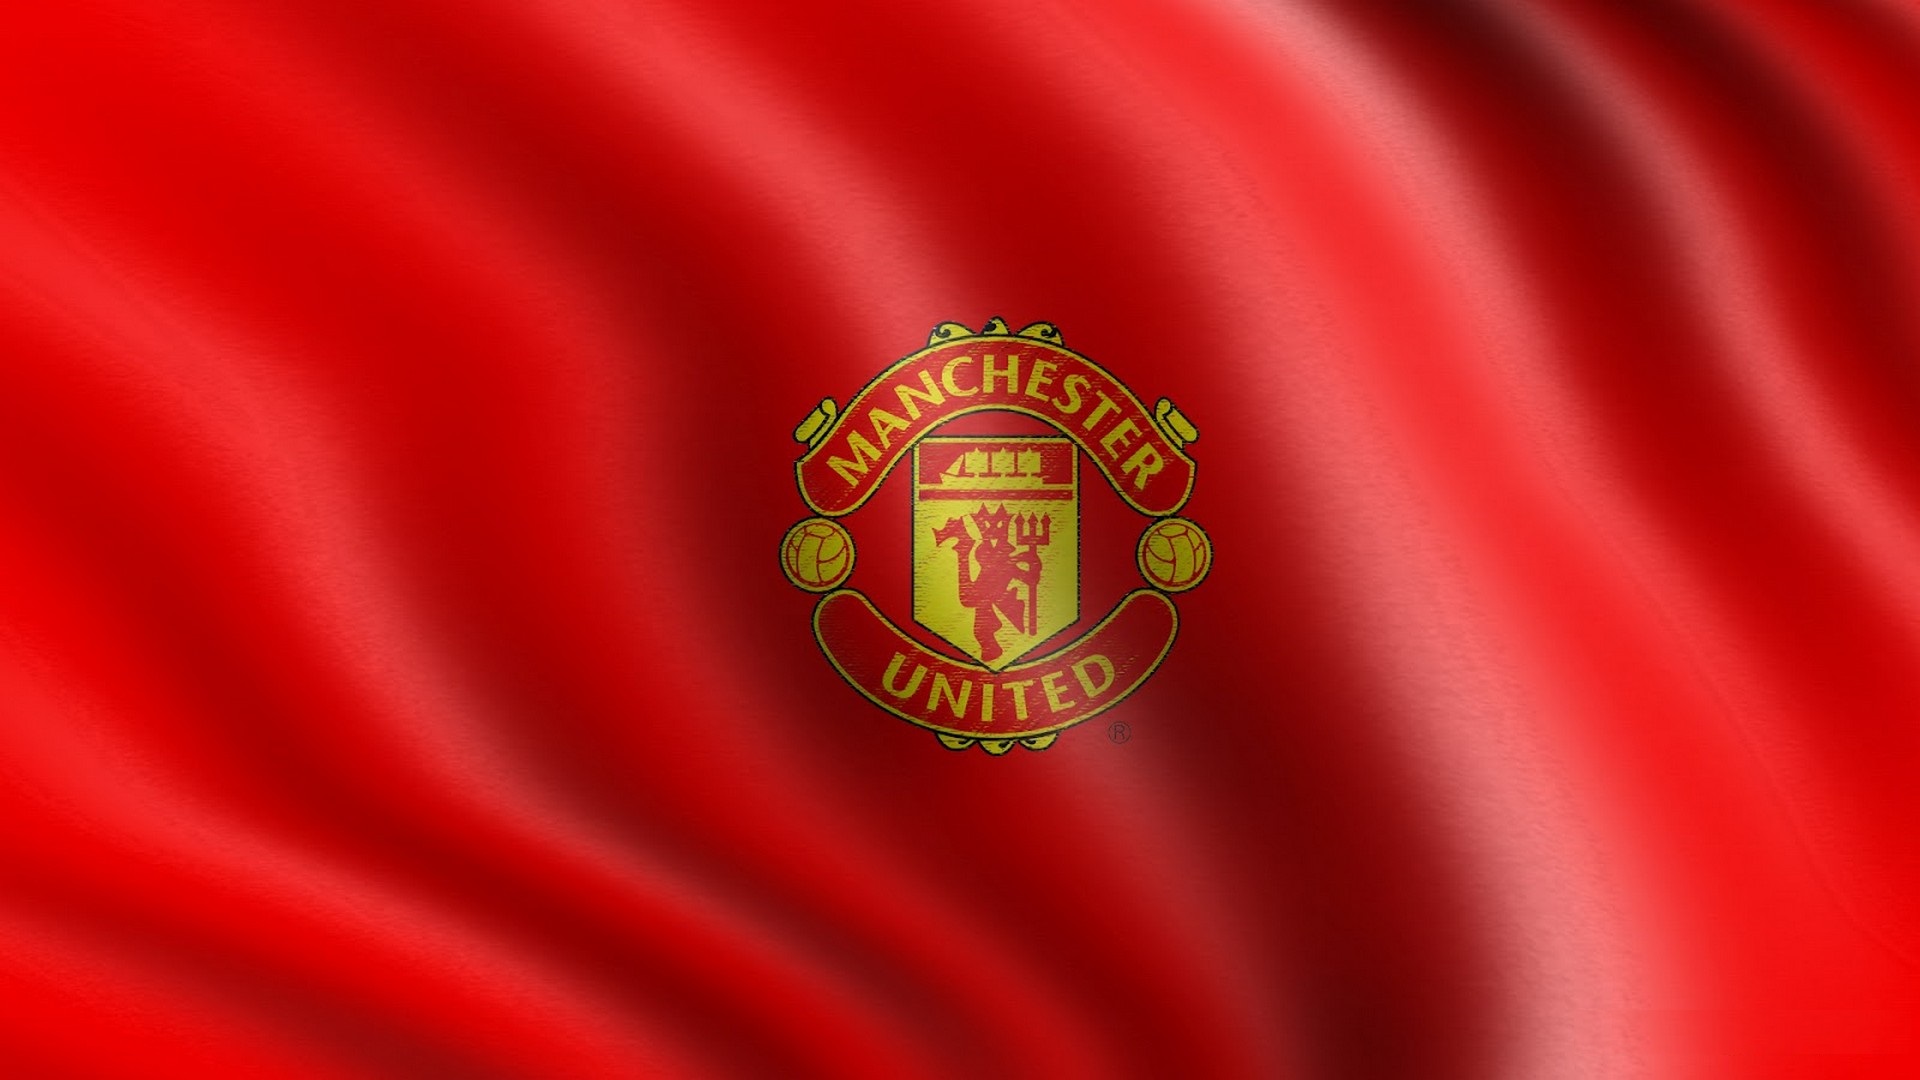 Manchester United Wallpaper with high-resolution 1920x1080 pixel. You can use this wallpaper for your Desktop Computers, Mac Screensavers, Windows Backgrounds, iPhone Wallpapers, Tablet or Android Lock screen and another Mobile device